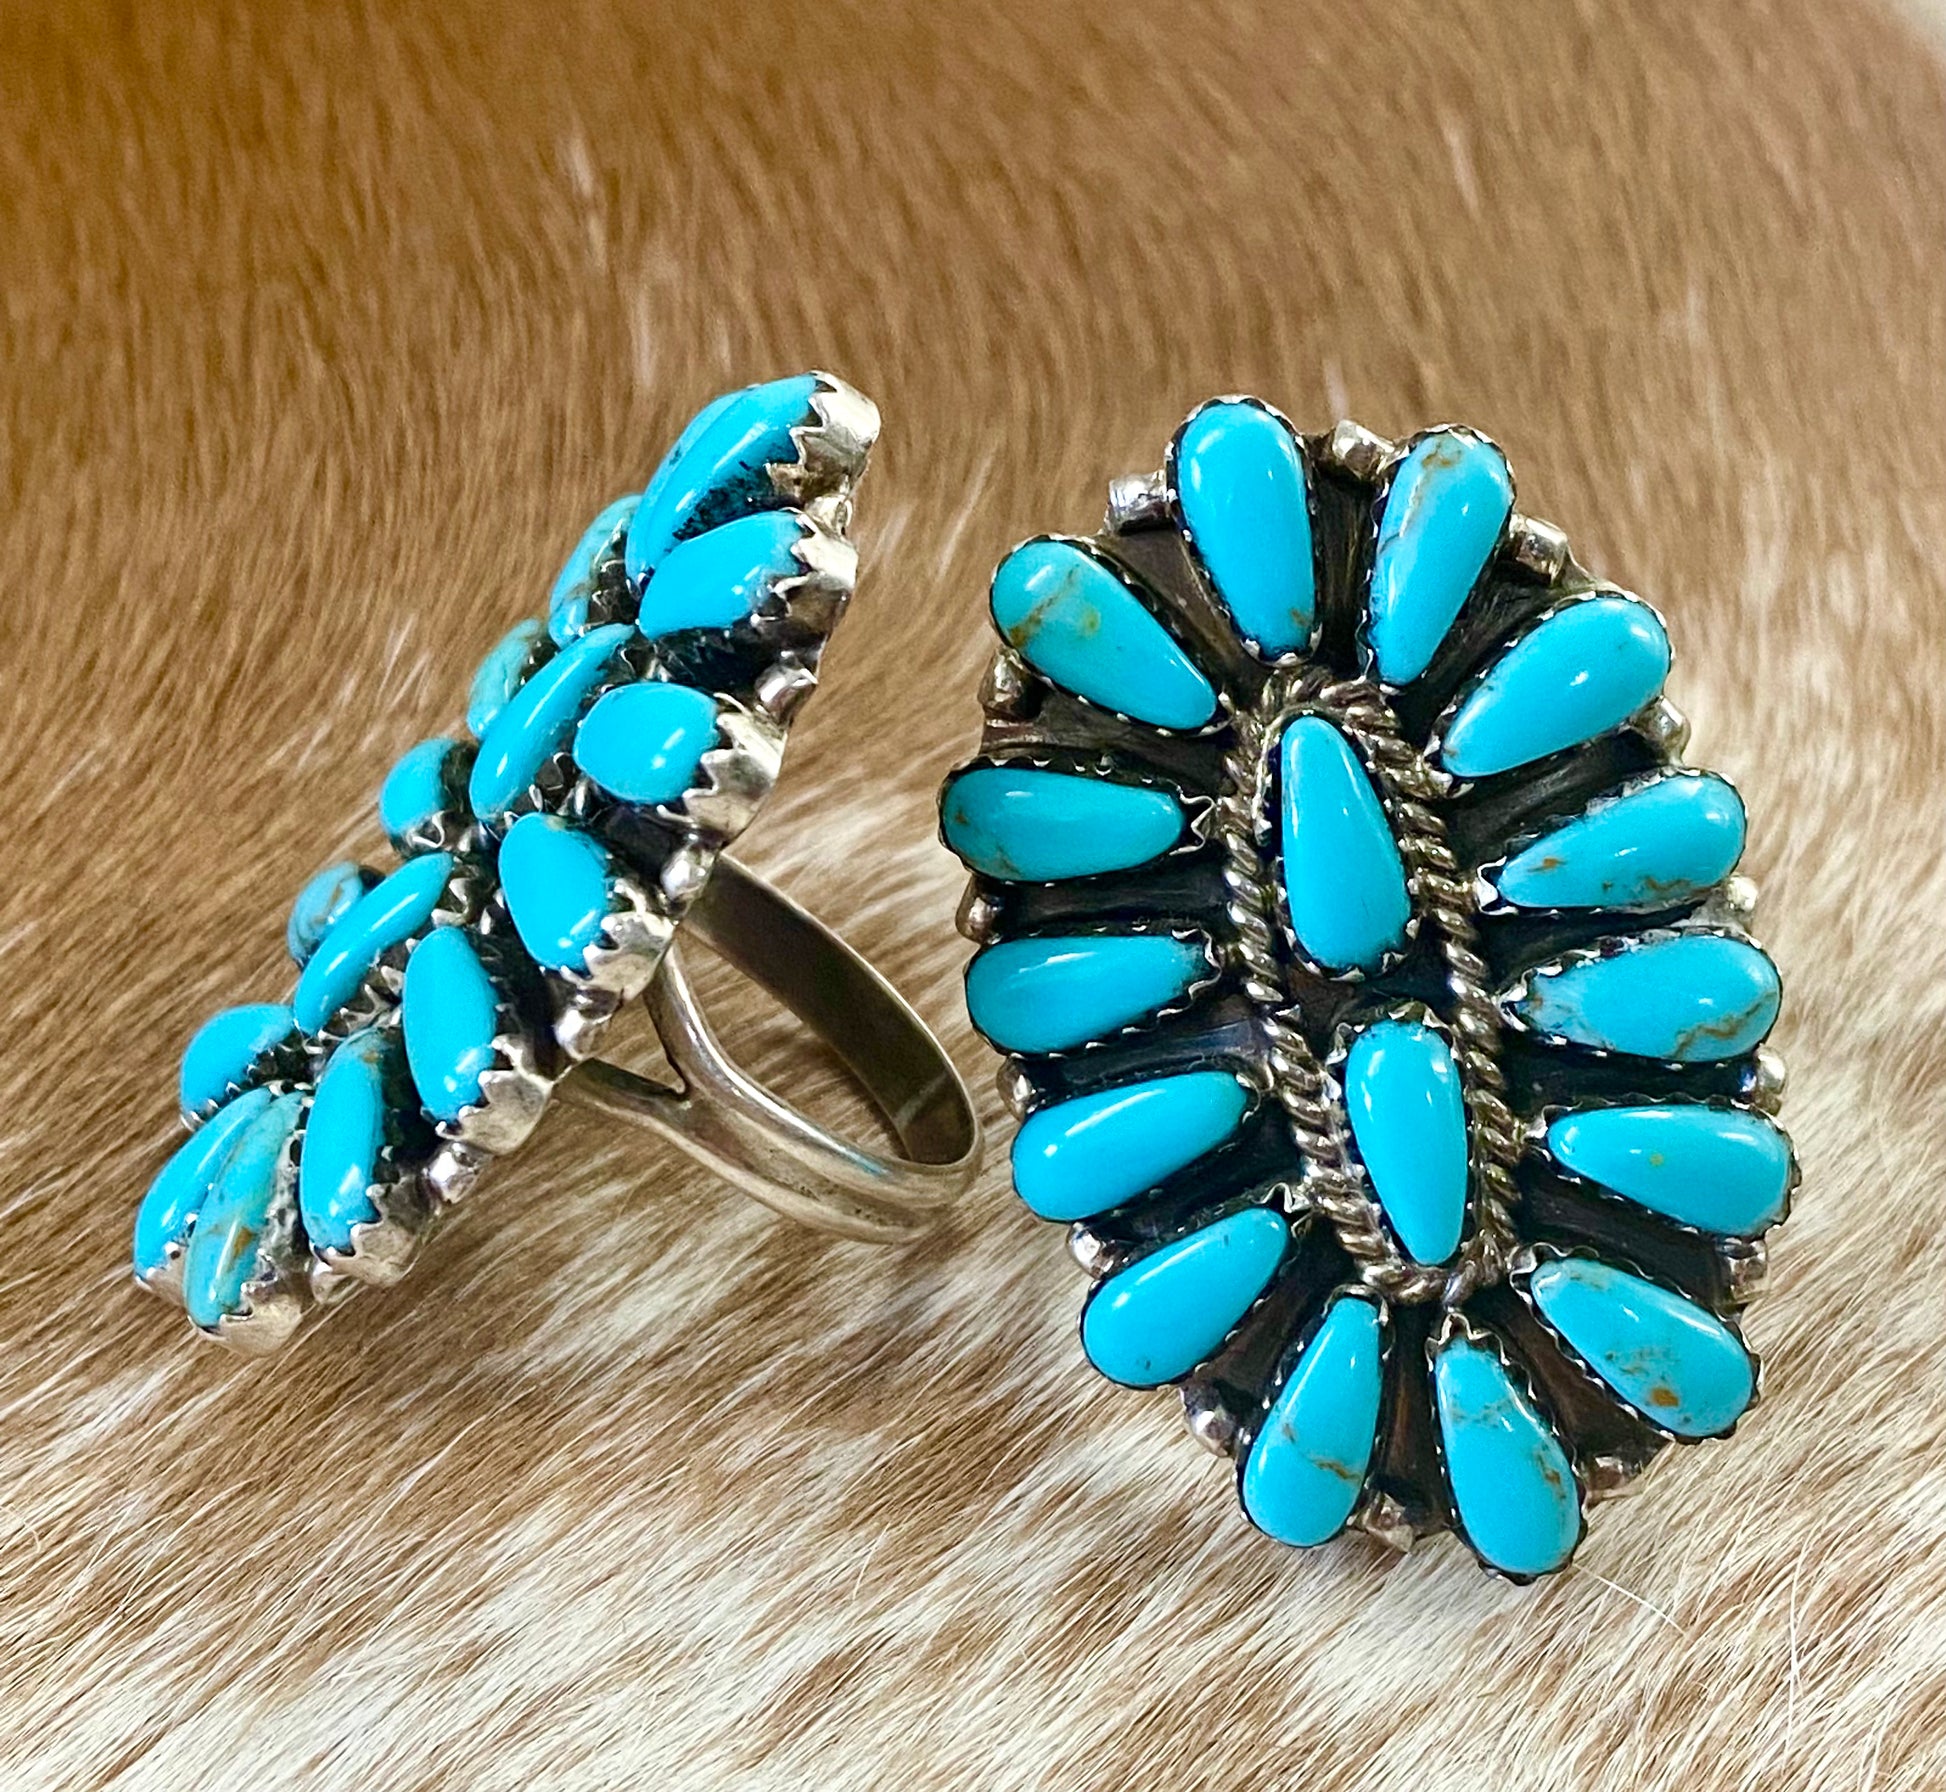 Turquoise traditional cluster sterling silver ring. Stamped sterling and signed “RW” on the back by artist silversmith. This piece is beautiful and will make a gentle statement with any outfit. Sizes 6.5 & 7 available. | Native American Made Turquoise Ring, Women's Boho Turquoise Jewelry Boutique, NFR Jewelry